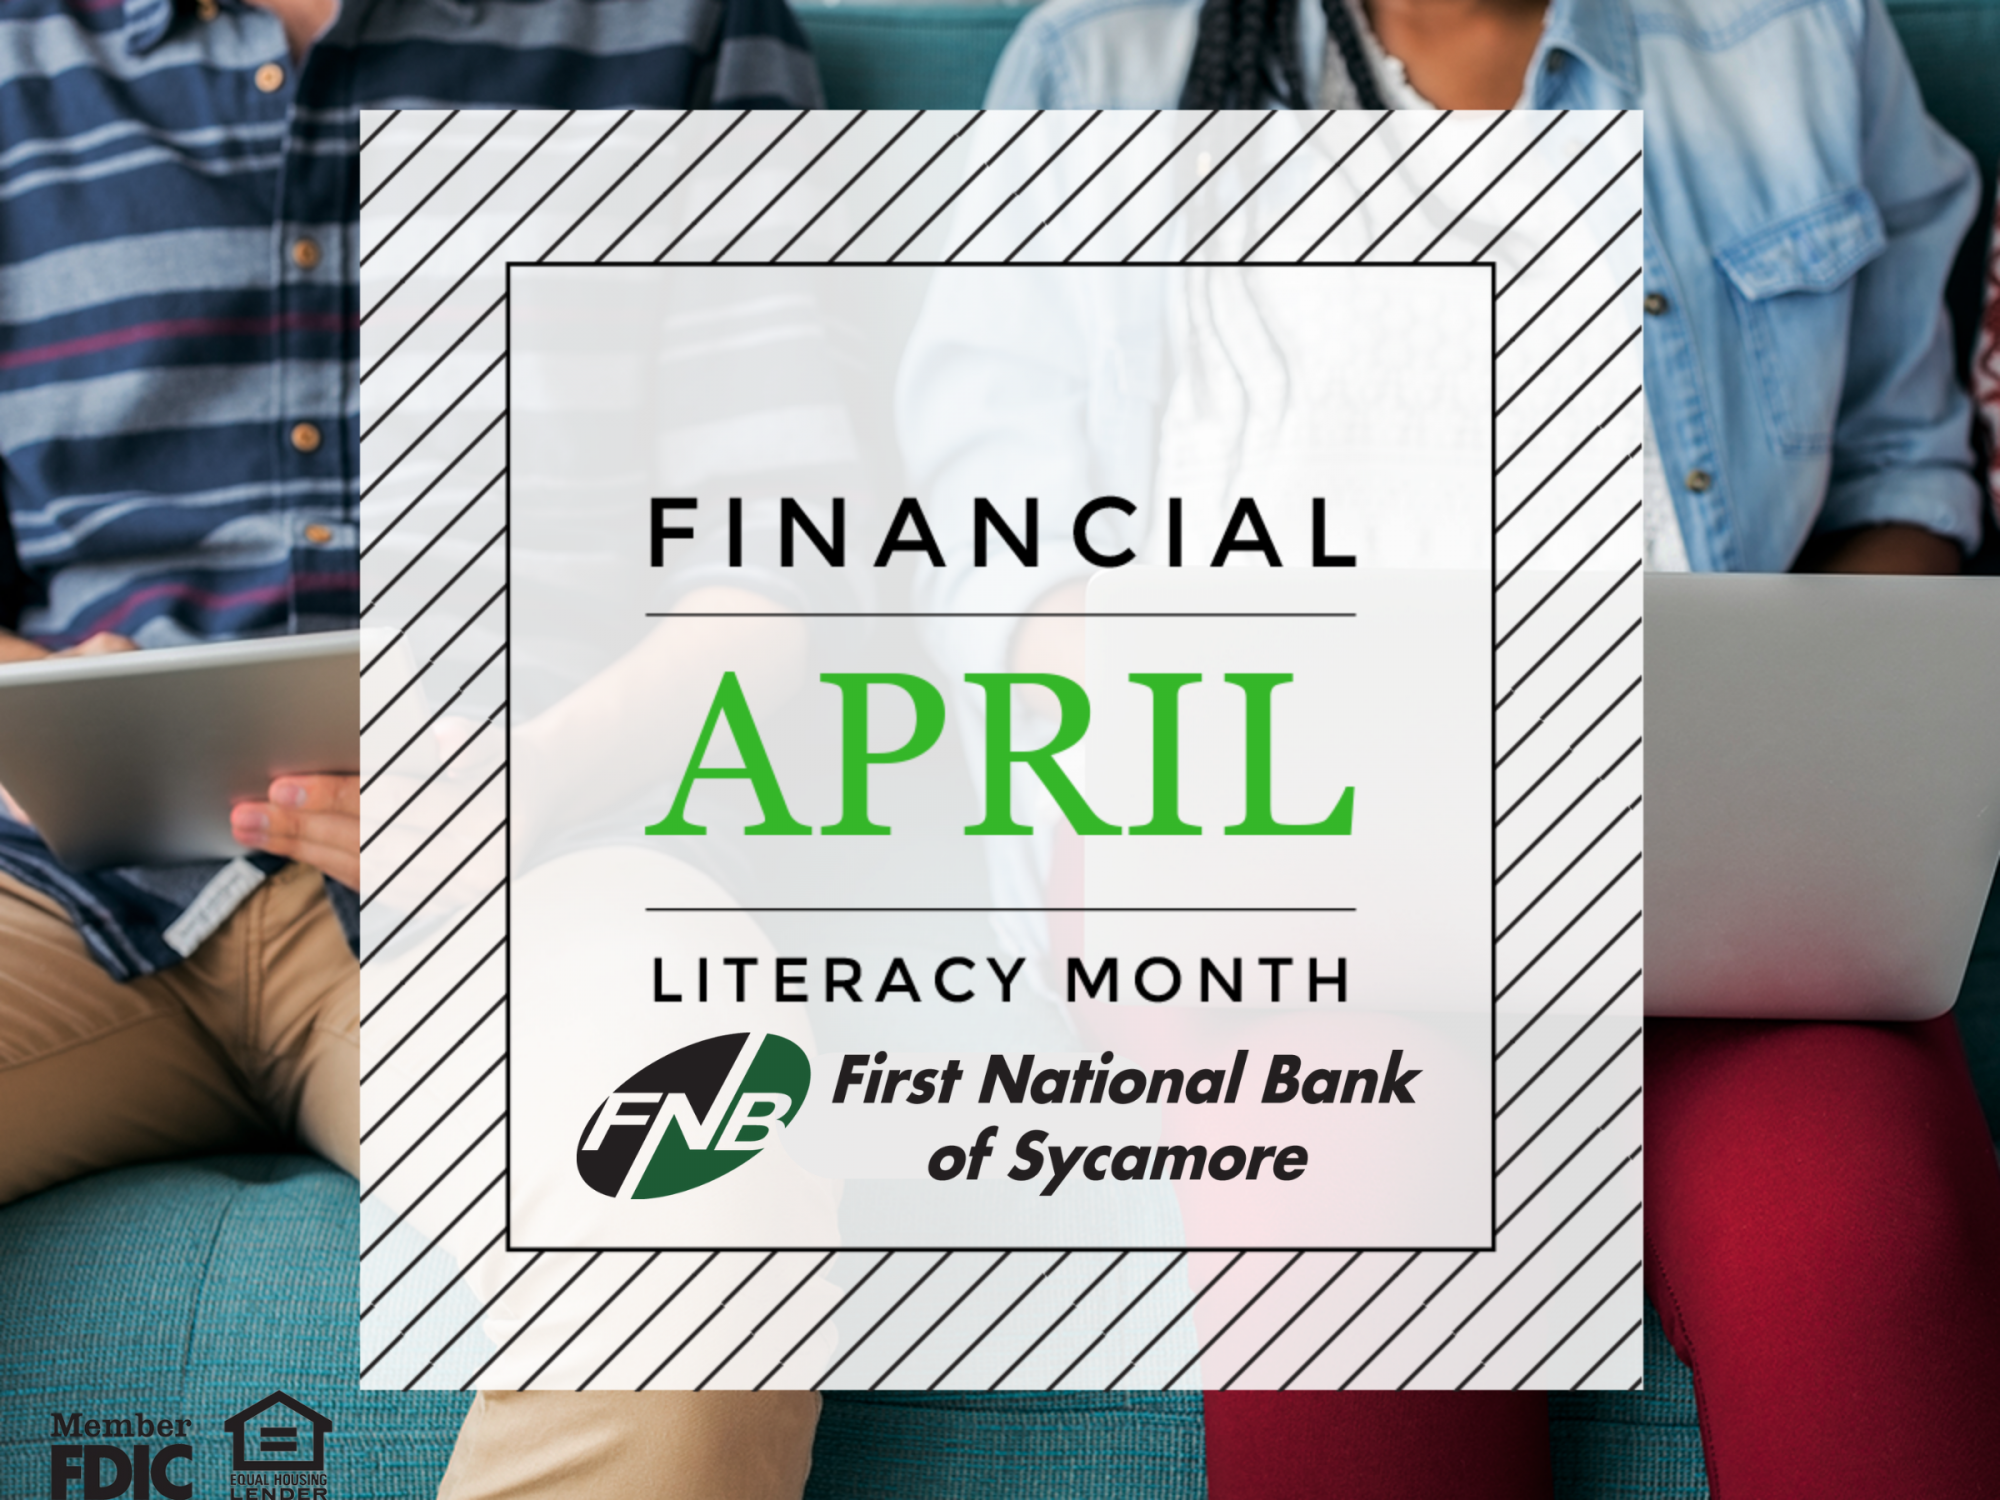 First National Bank of Sycamore, ICBA Encourage Financial Literacy at Every Age and Life Stage